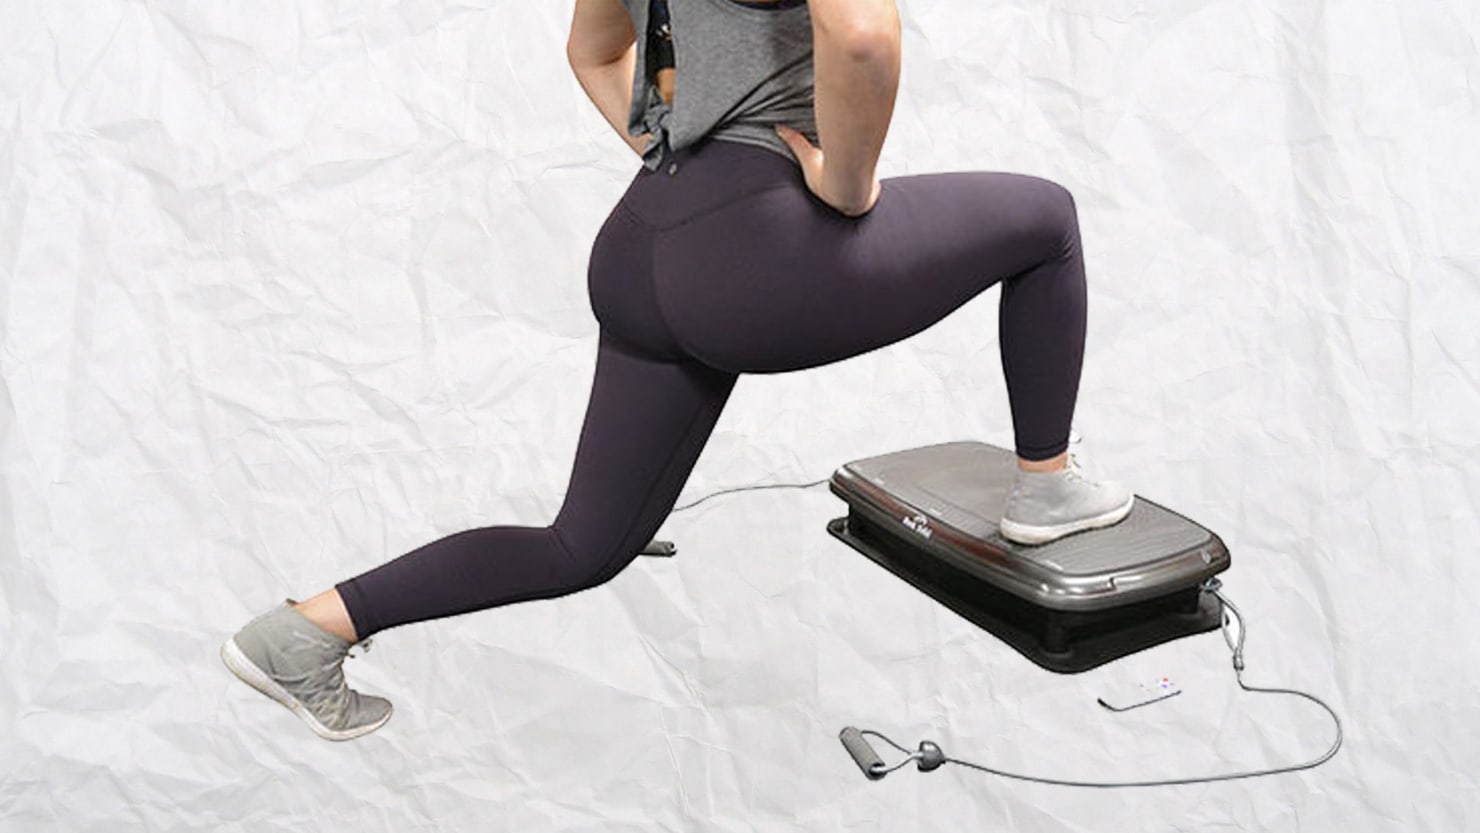 Reduce Back Pain With This Vibrating Exercise Machine